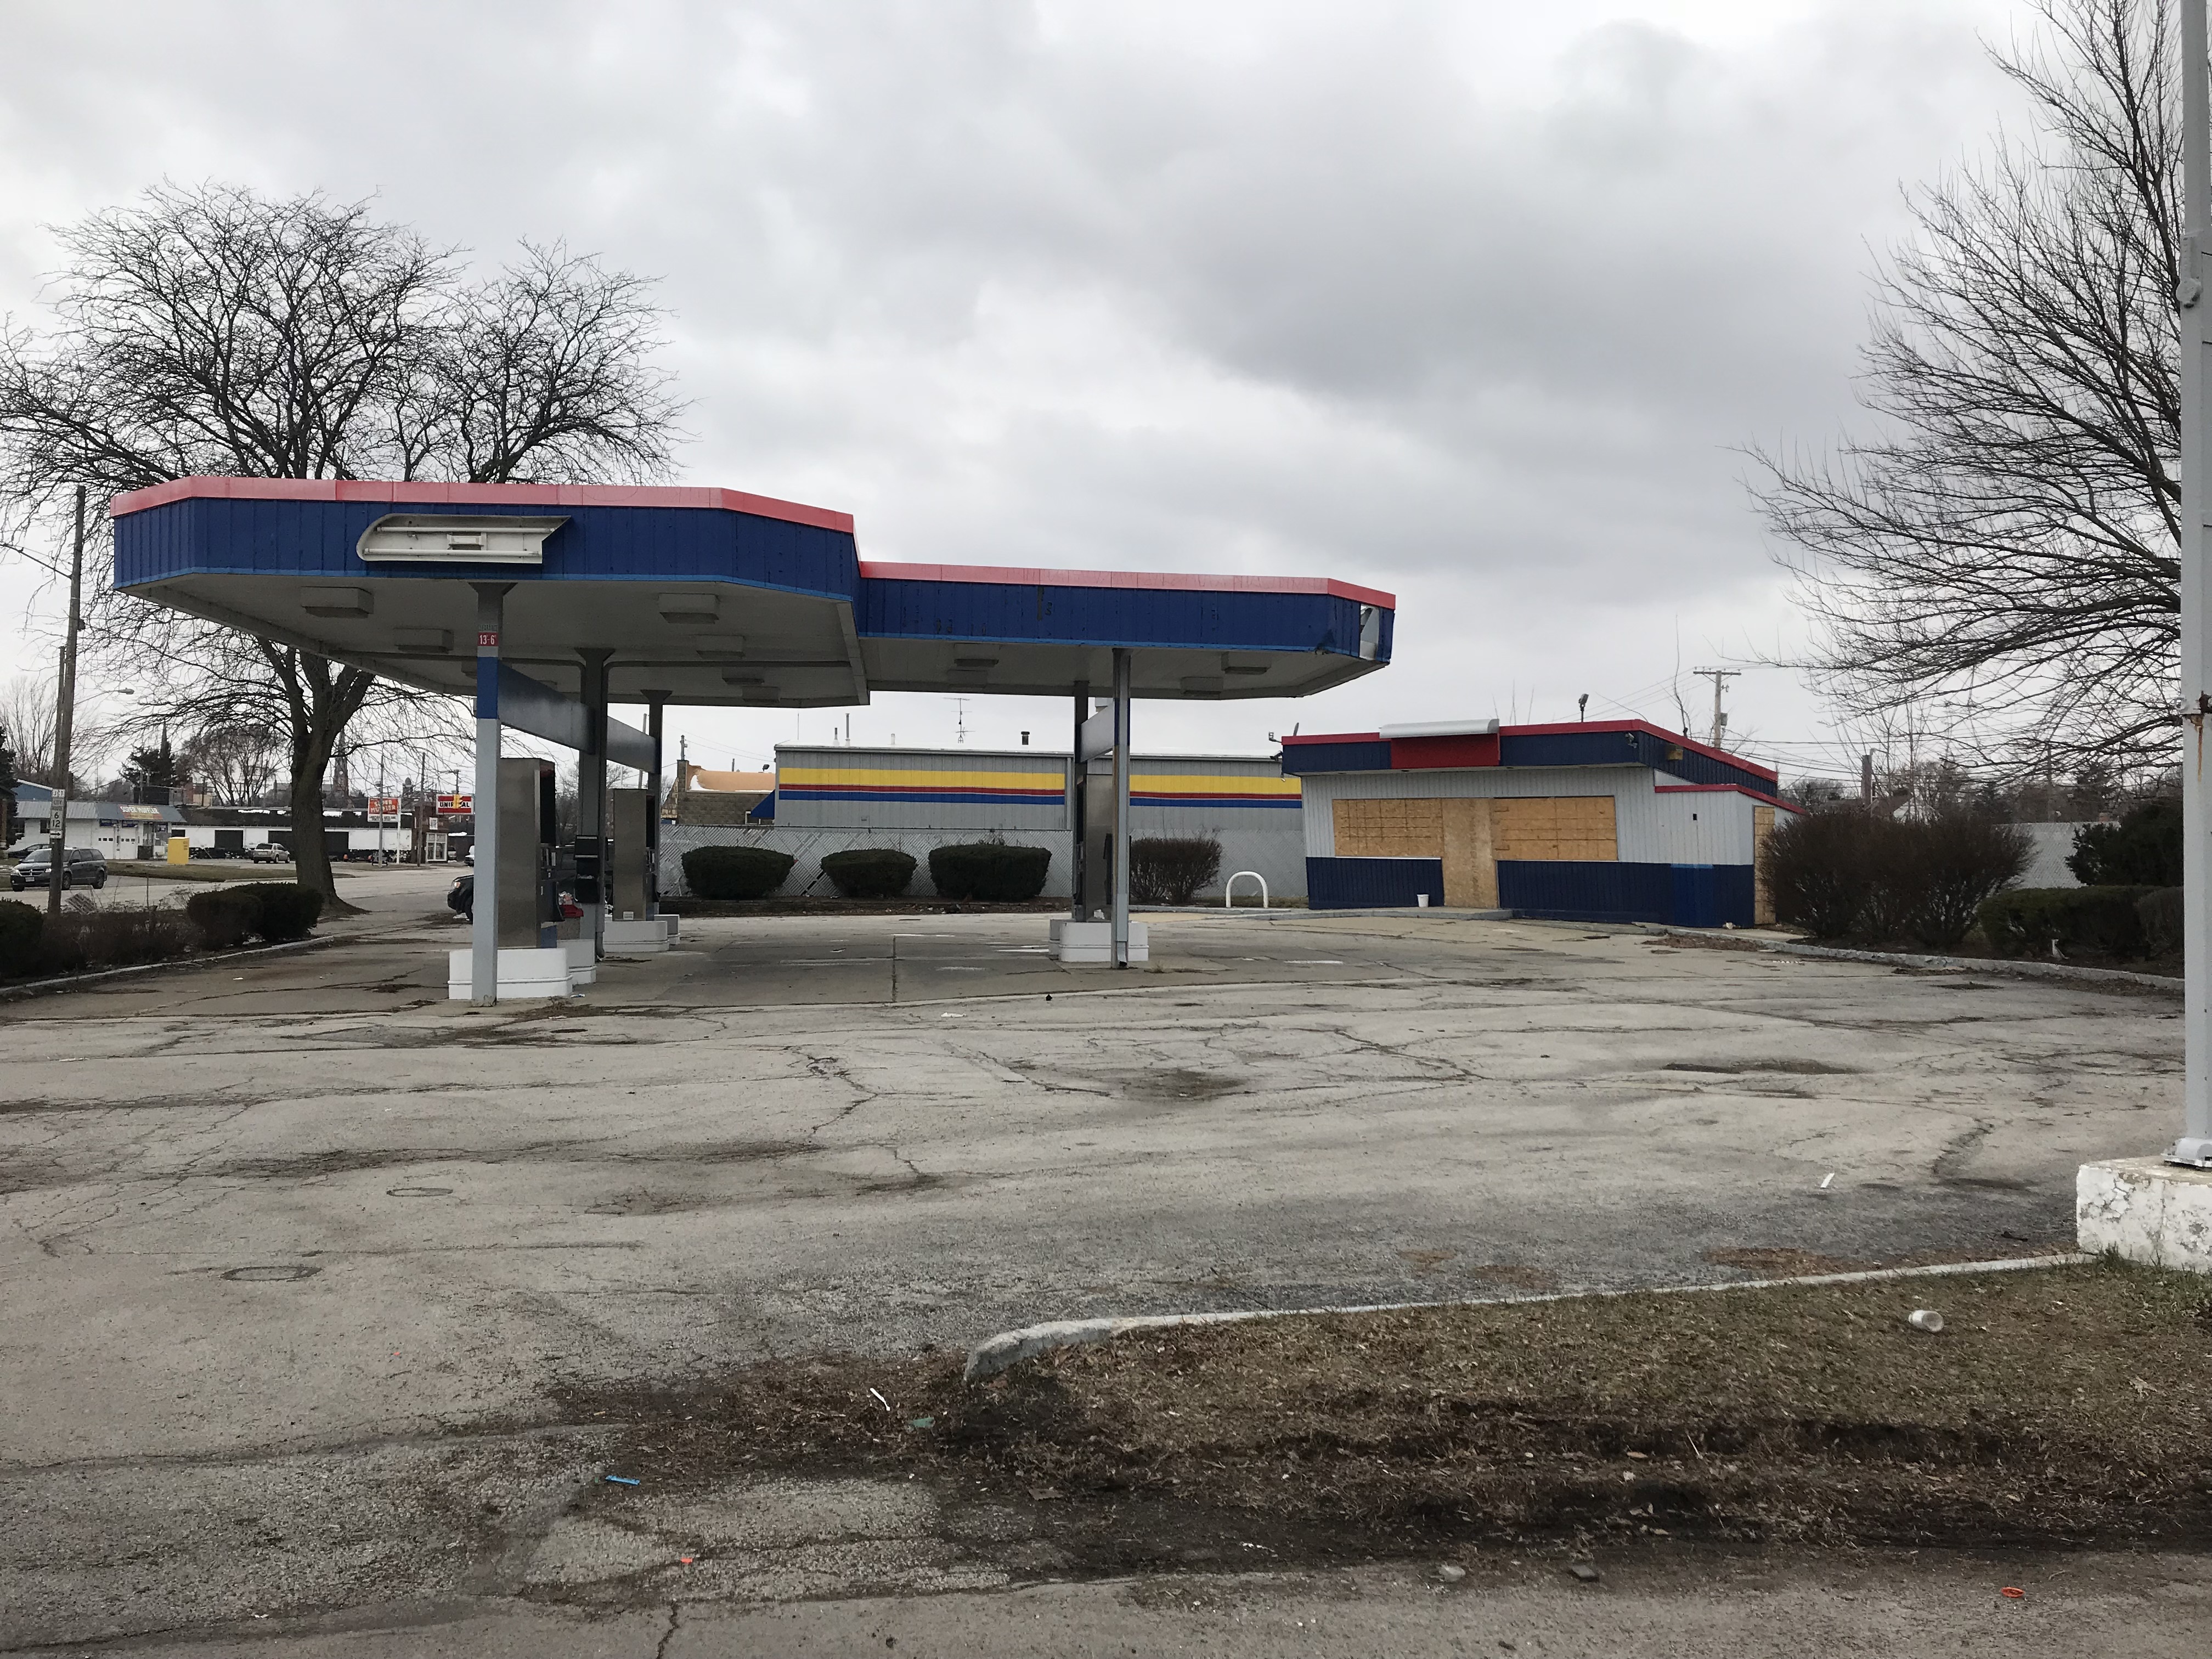 Gas station that is boarded up and empty on an overcast day